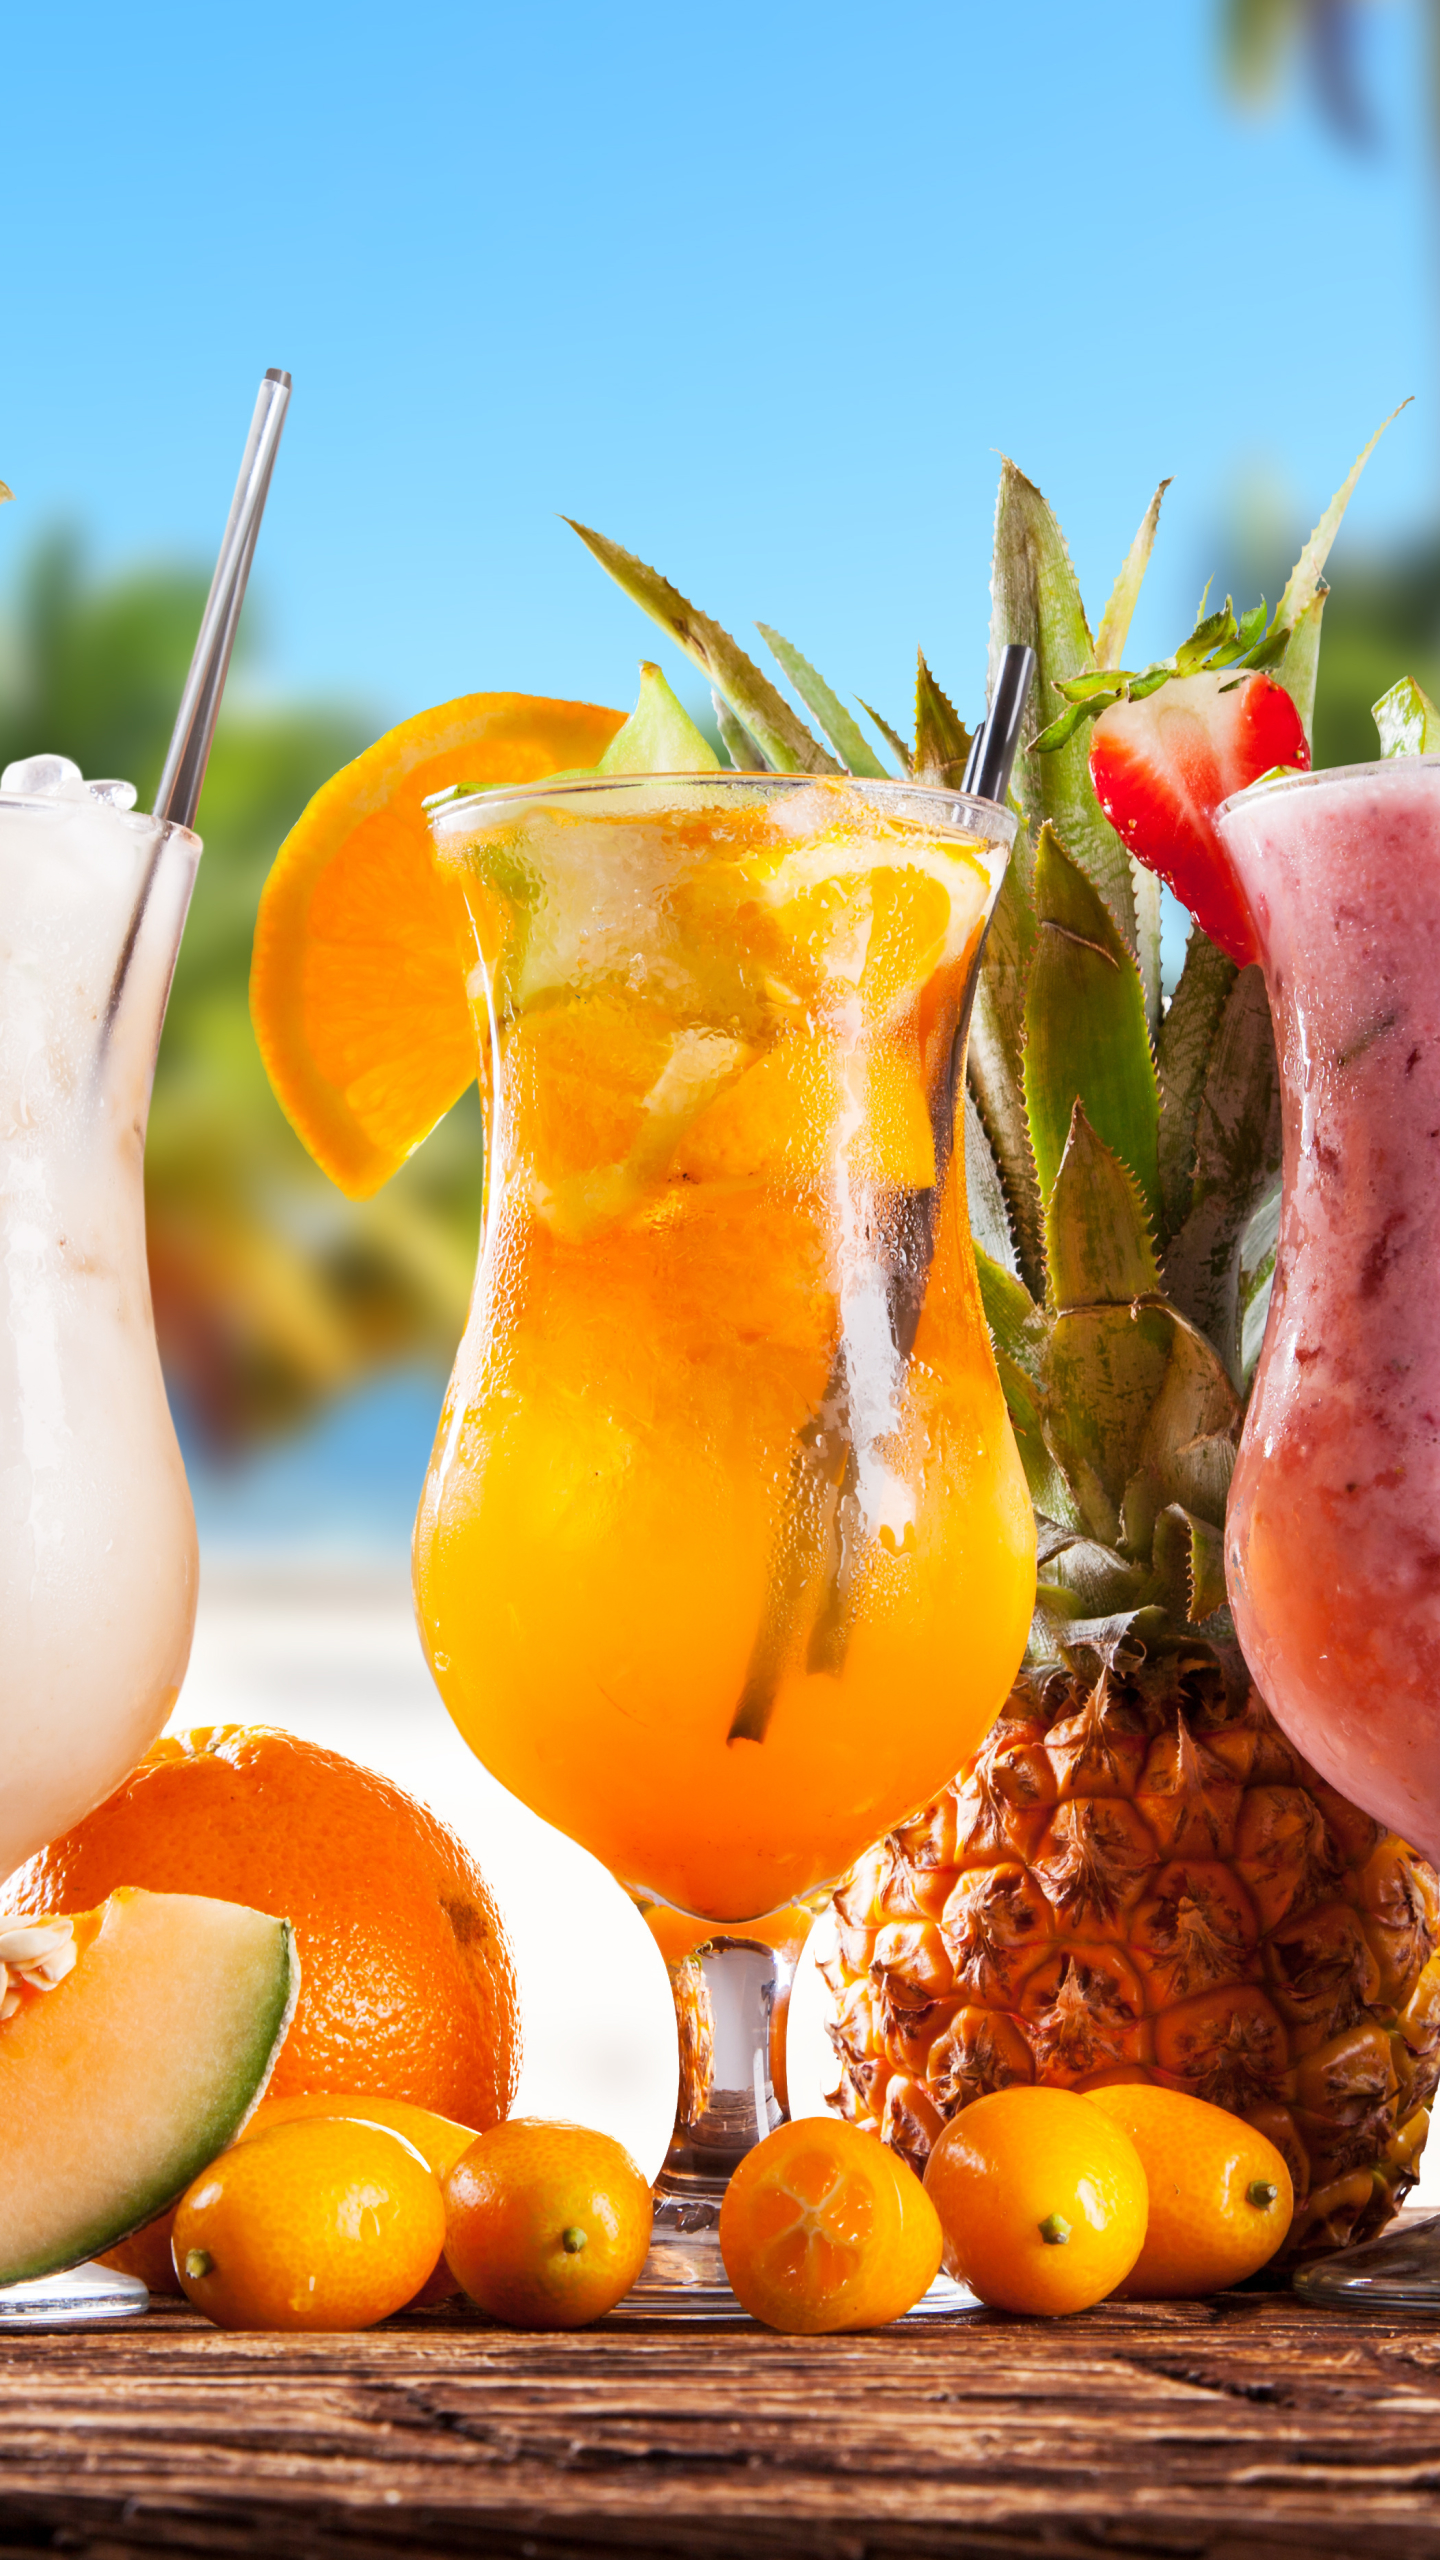 food, cocktail, pineapple, melon, coconut, fruit, drink, glass, pitaya, tropical images